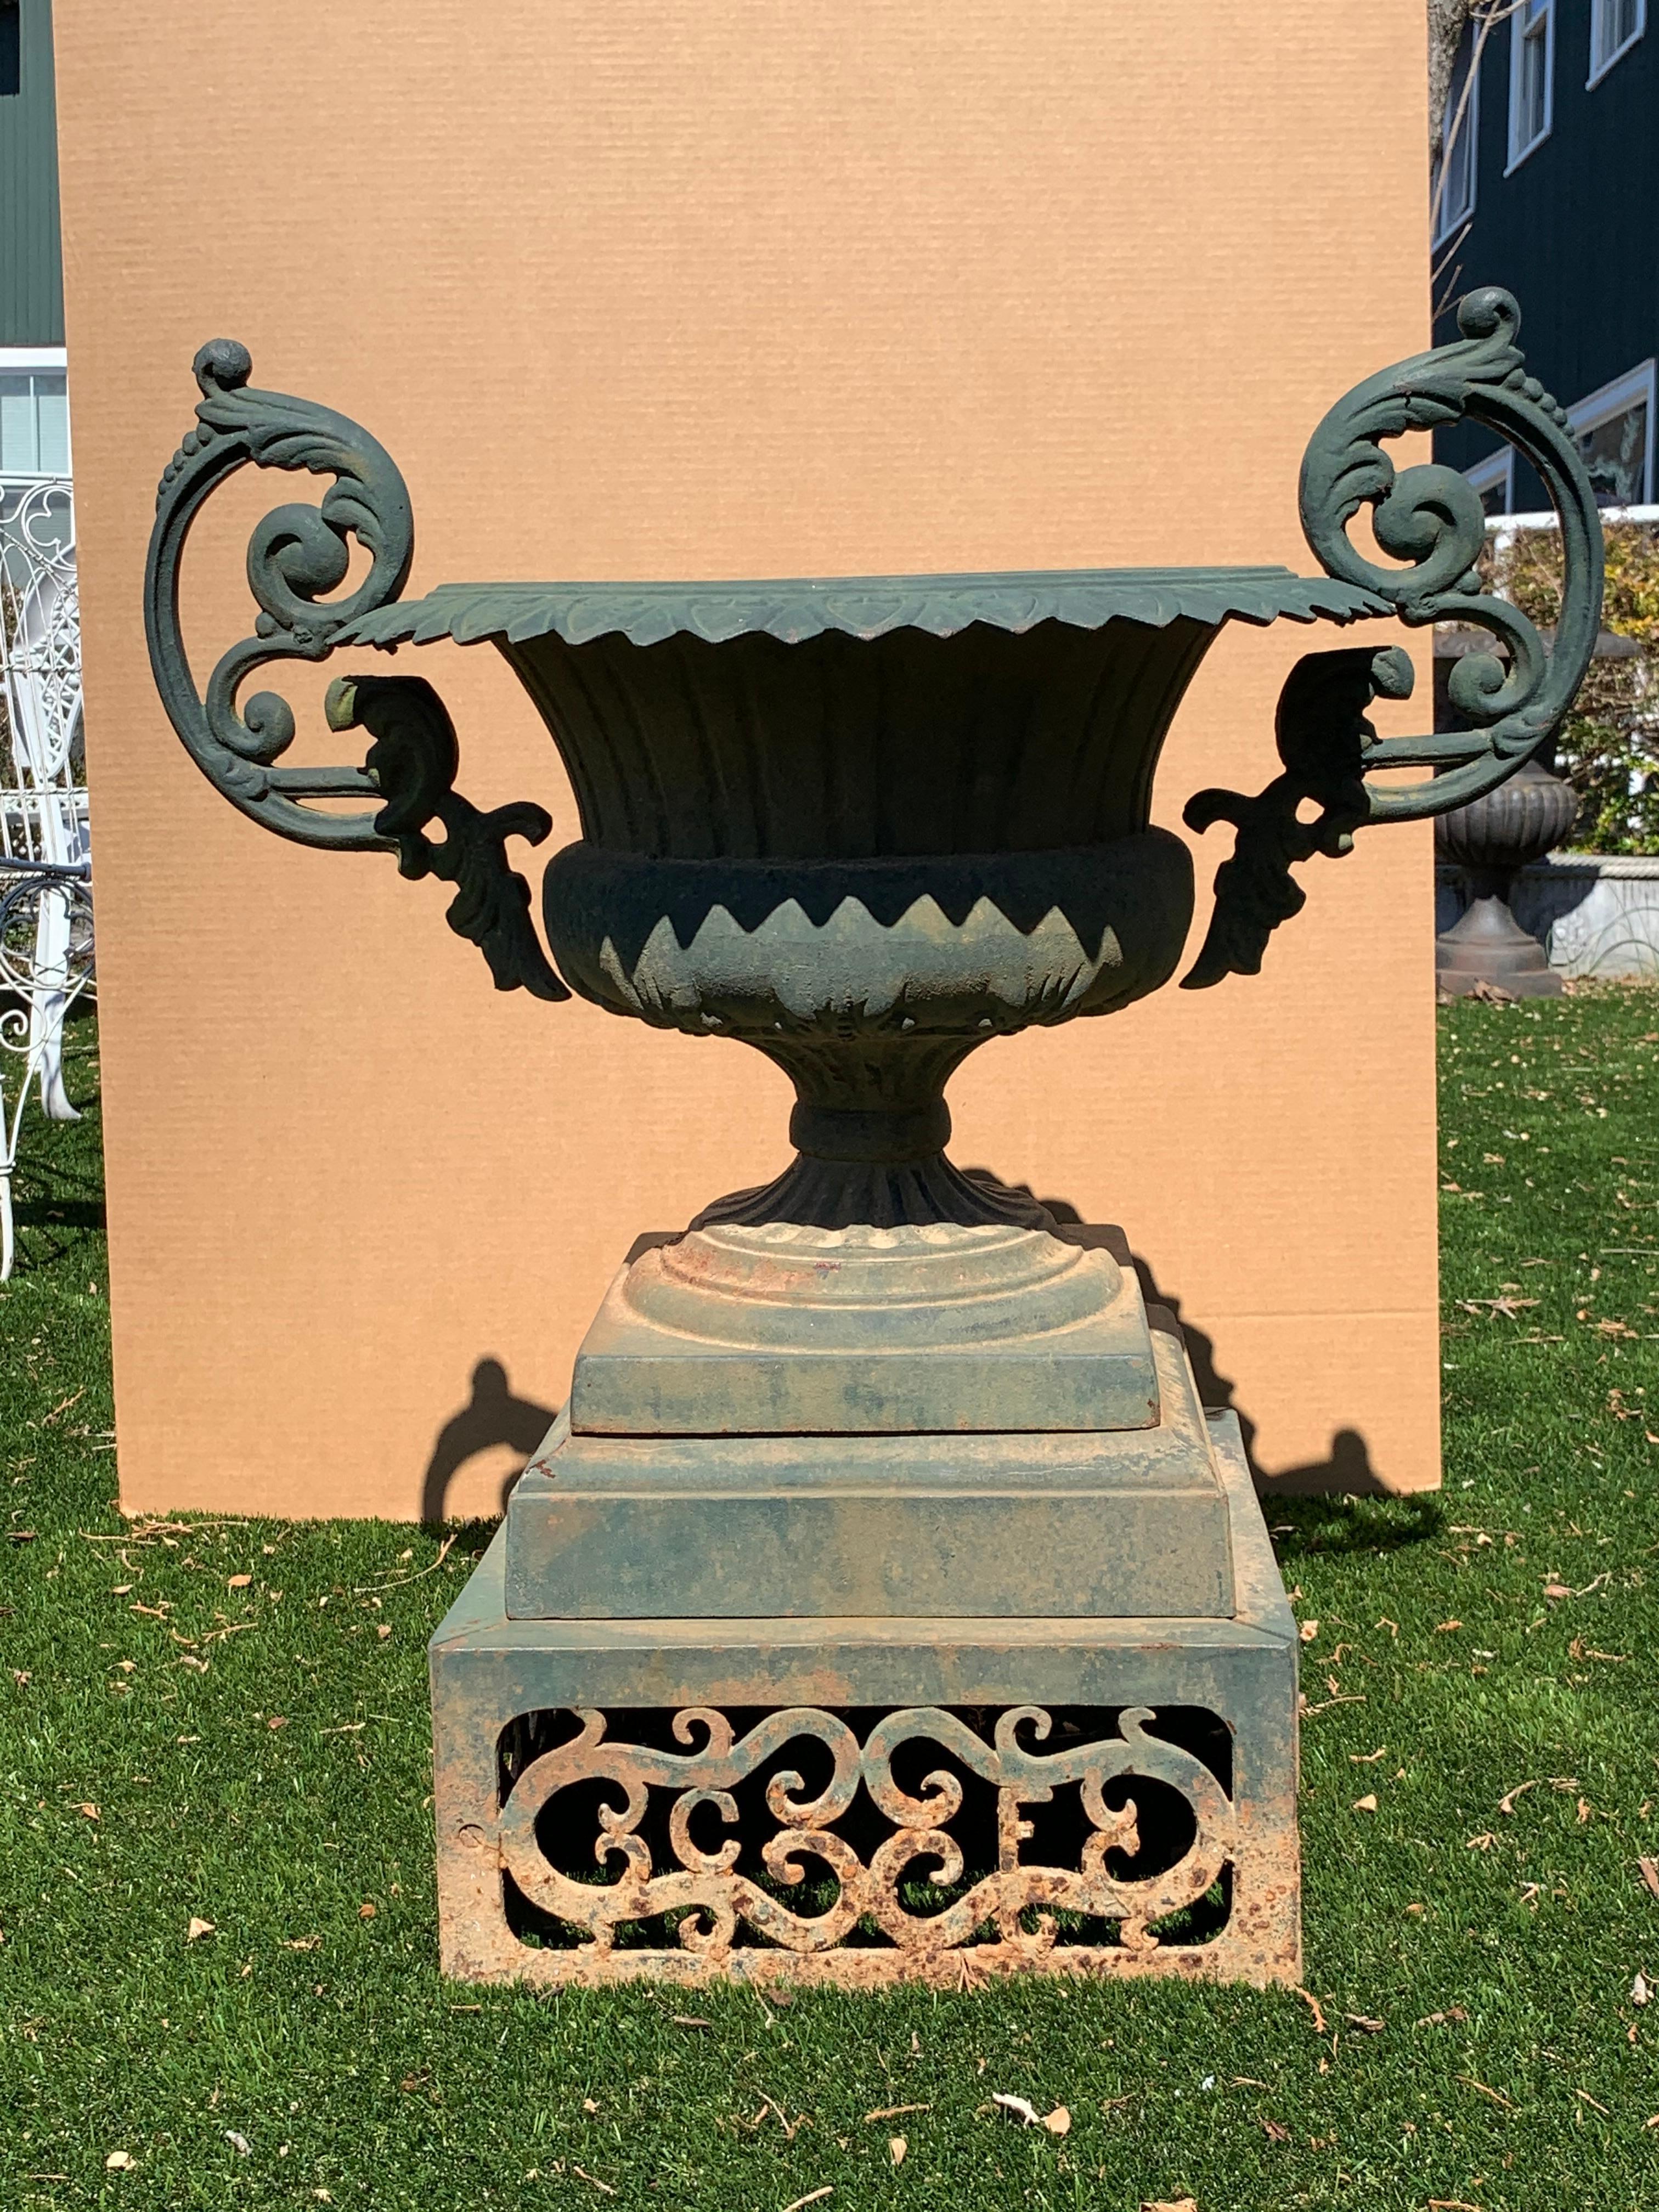 The prettiest urn in the garden, a neoclassical beauty with wonderful ribbed body, pedestal base with ornate piercework decoration on the plinth and super fancy handles on each side. The color is an enviable natural aged verdigris with contrasting